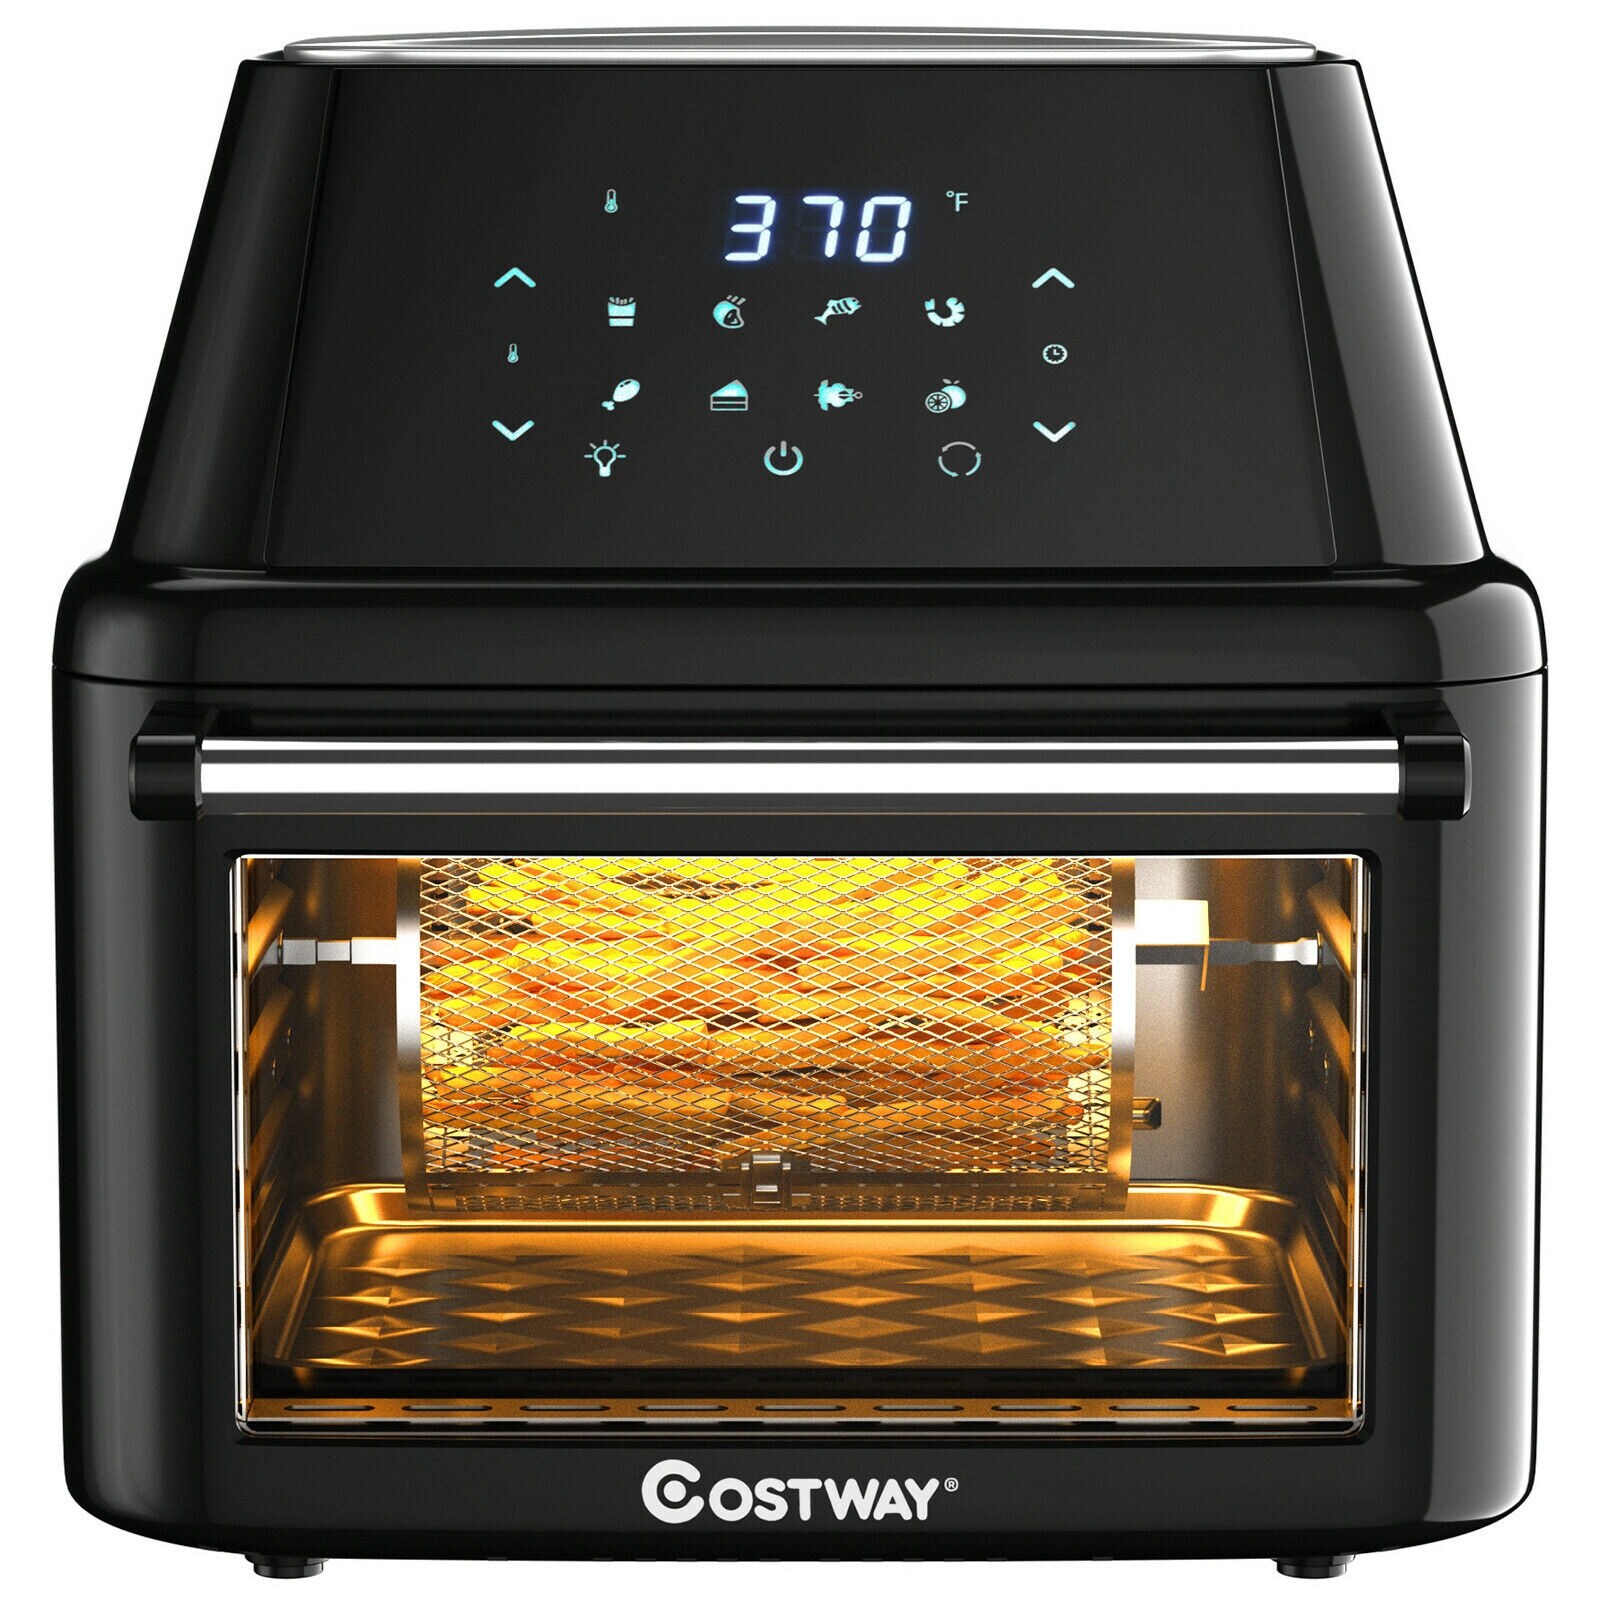 Costway 6.5 Liter Air Fryer Functions & Smart Touch Screen & Reviews